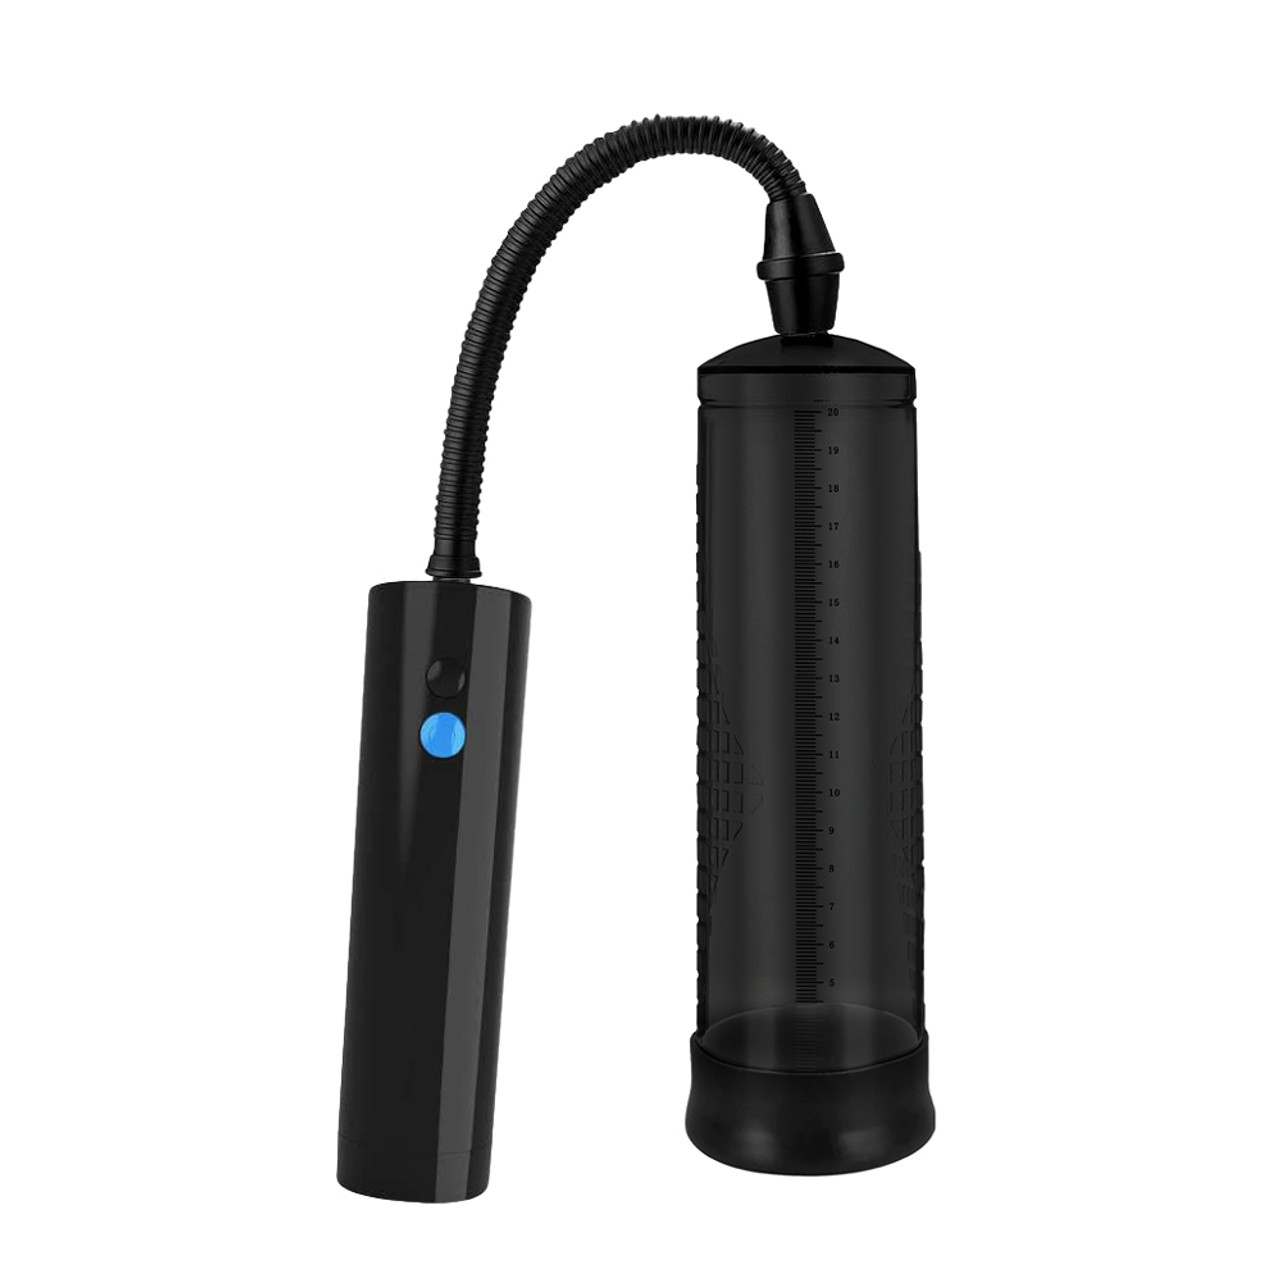 Buy the Pumped Extreme Power 3-function Rechargeable Auto Penis Pump and Smoke Clear Vacuum Acrylic pic pic